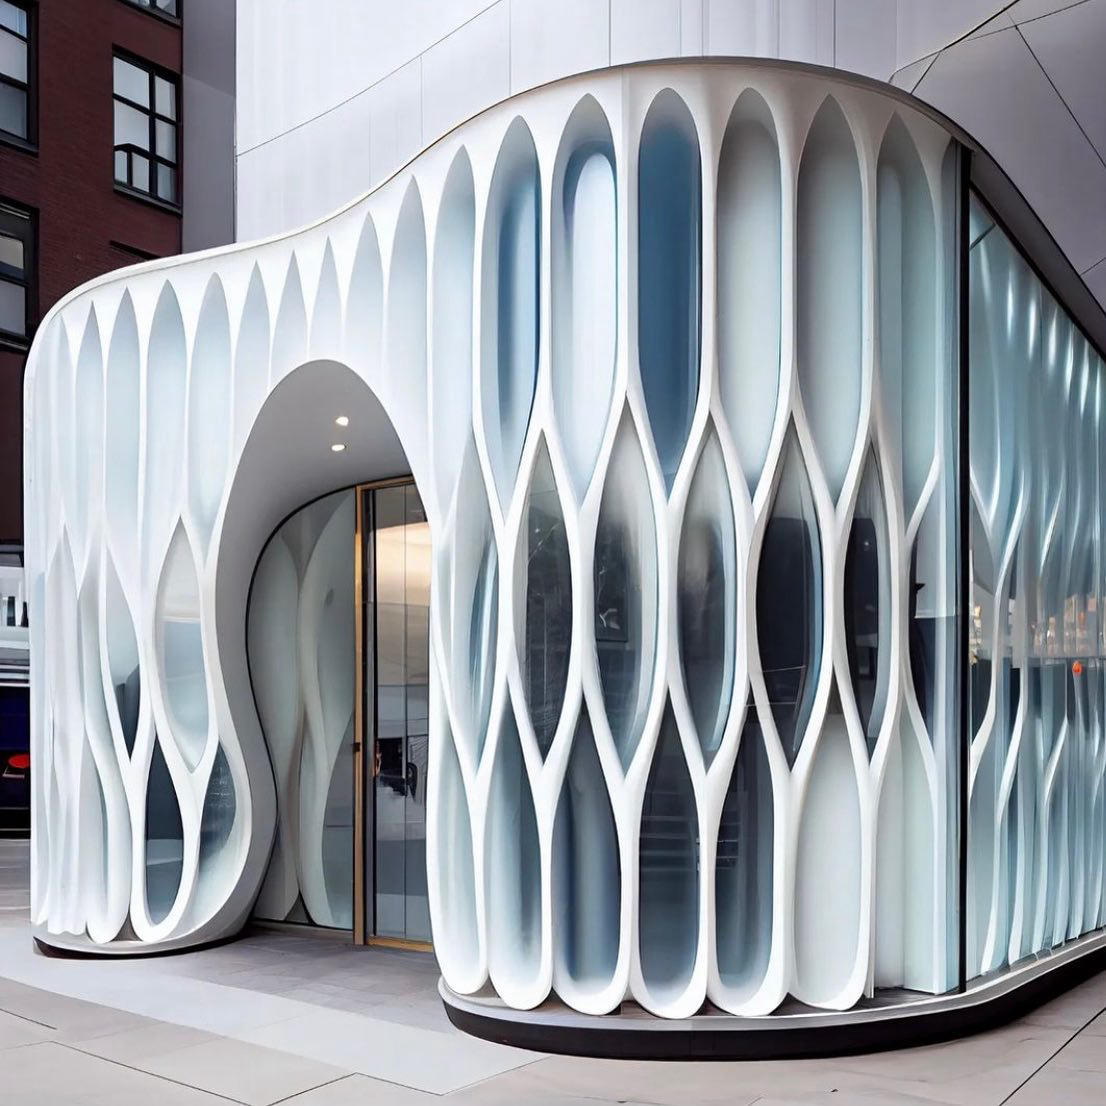 image  1 Arc.Only - What do you think about this facade